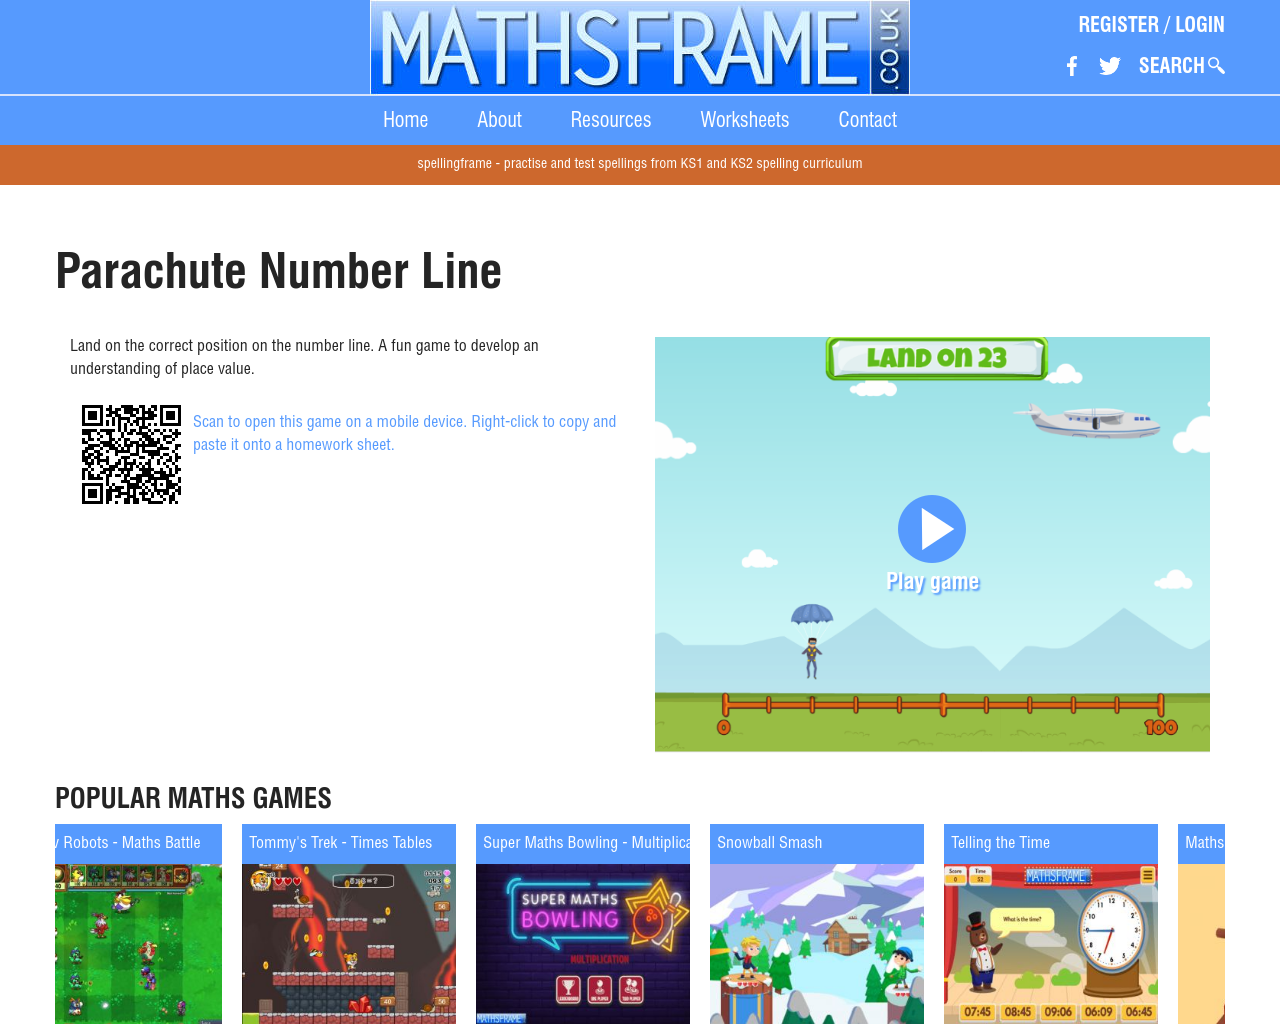 Parachute Number Line Game